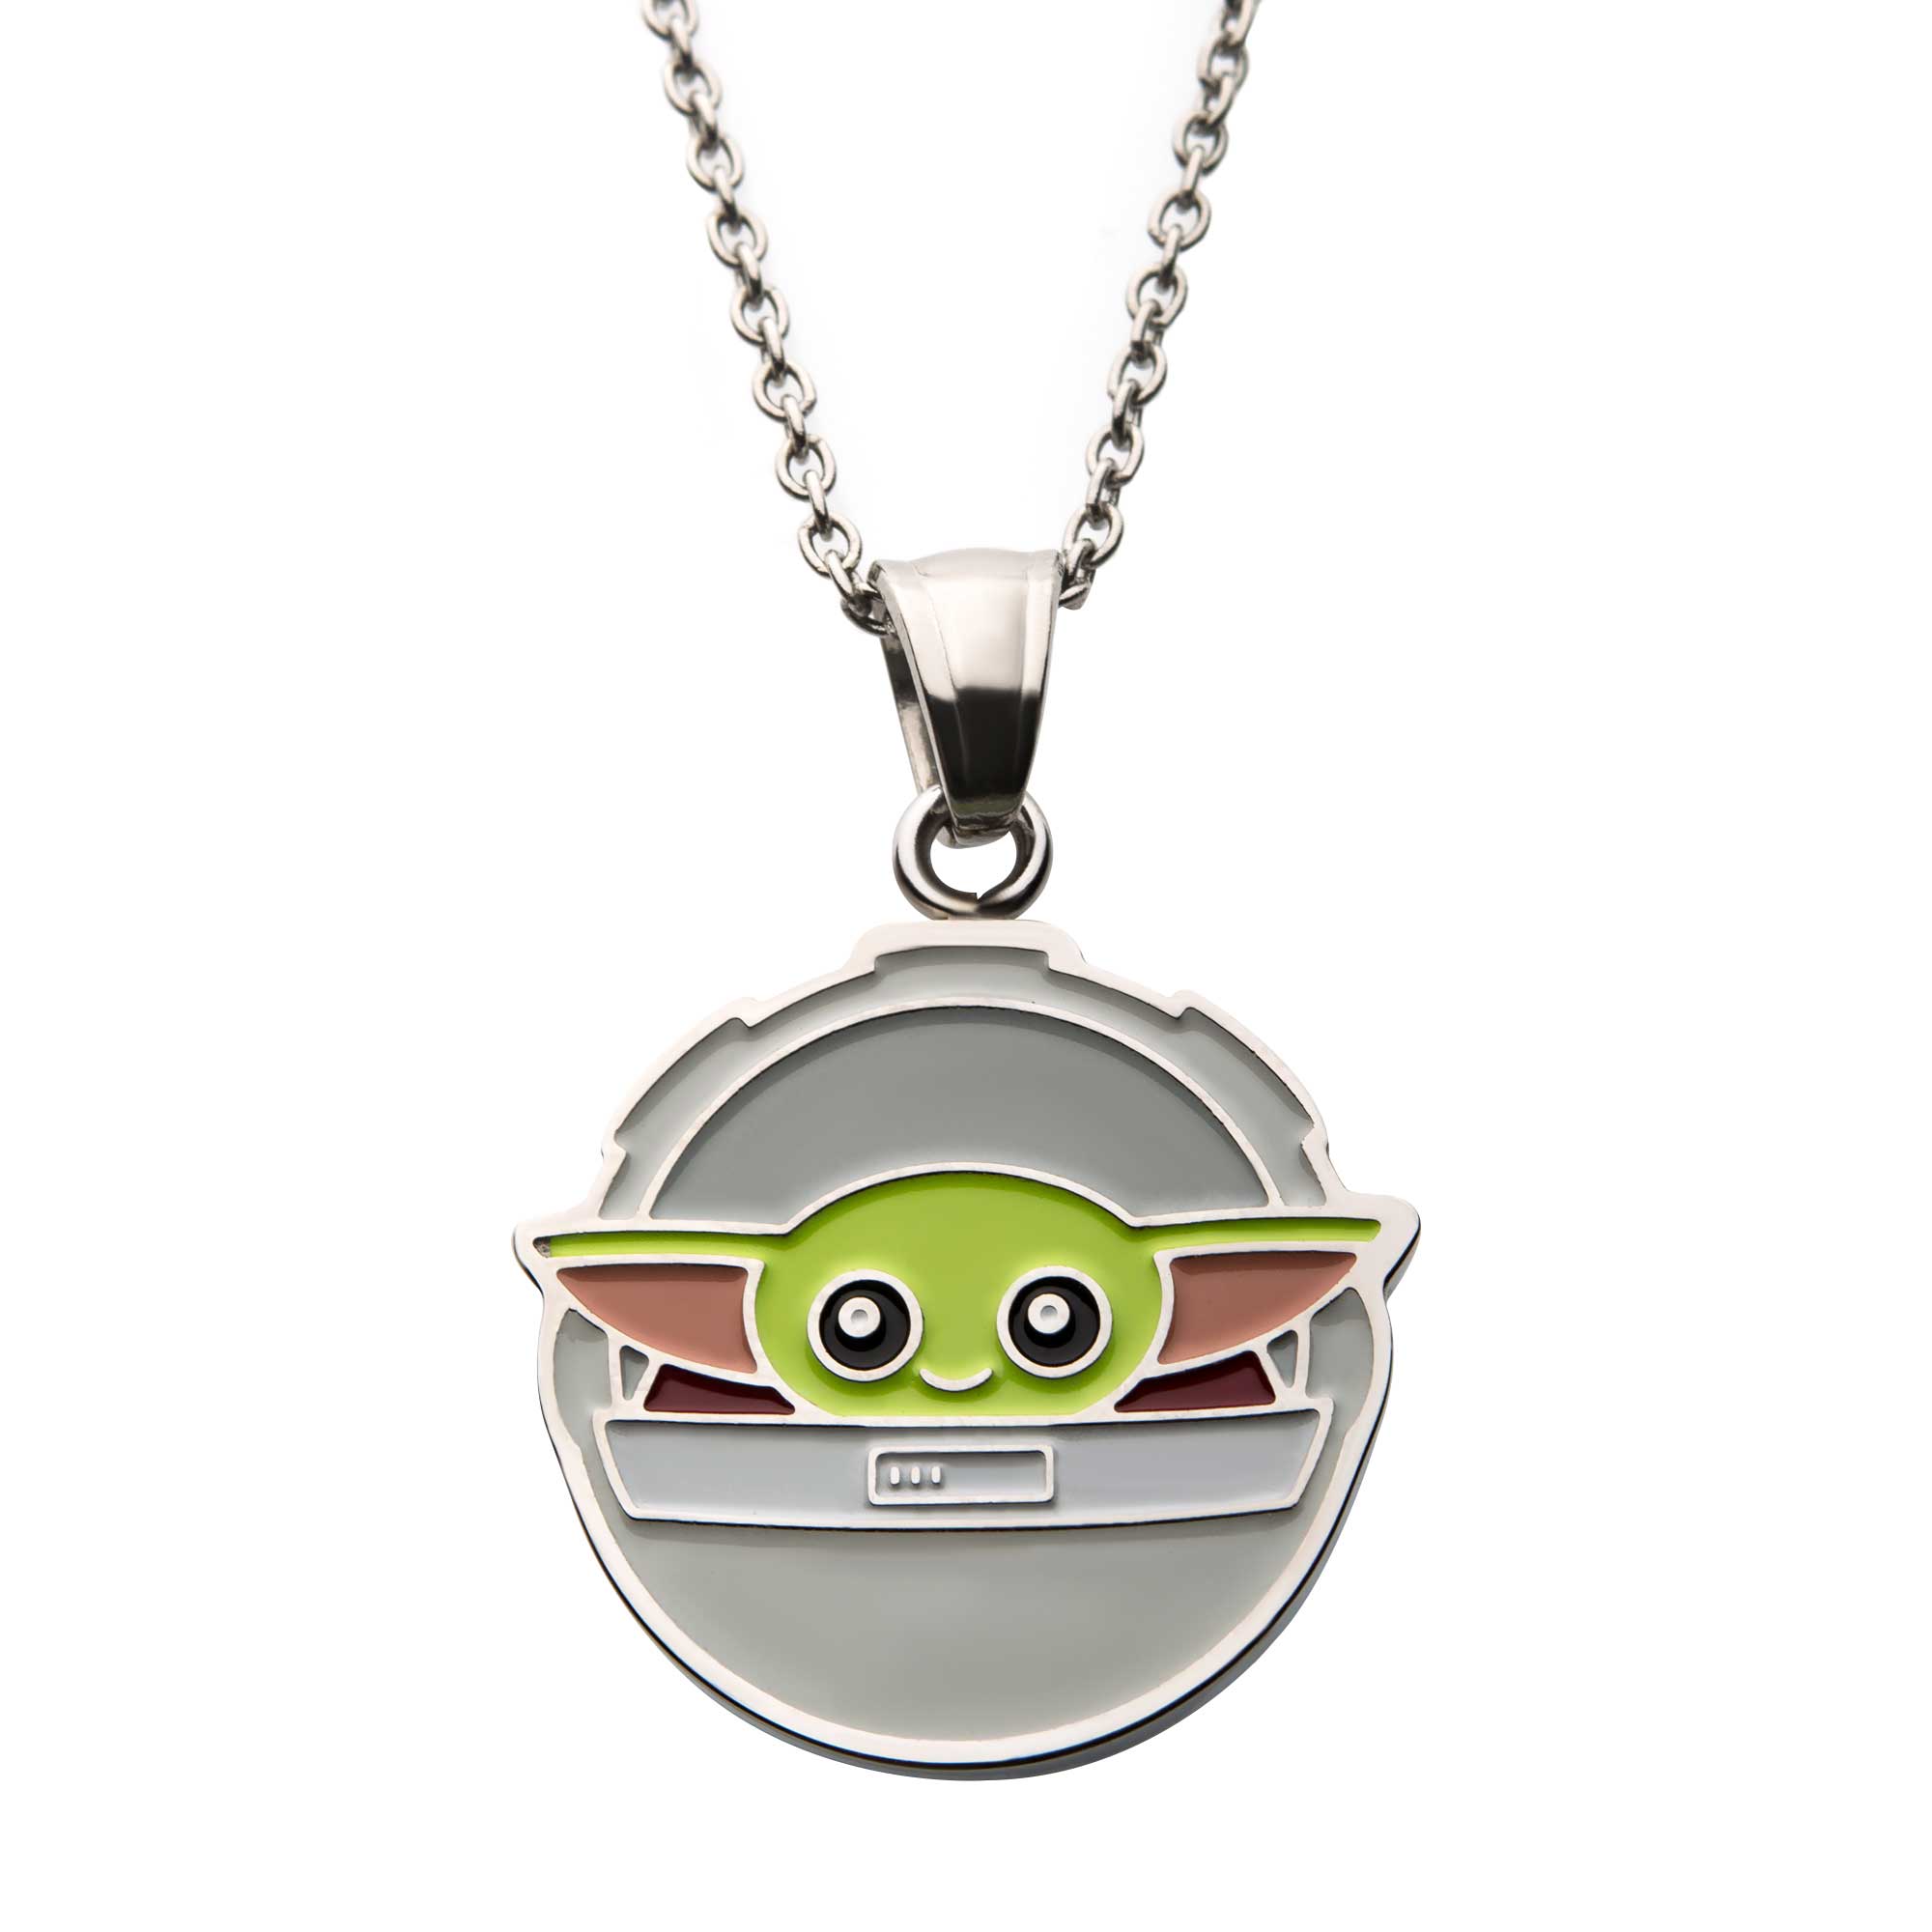 Star Wars: The Mandalorian Grogu (AKA: Baby Yoda/ The Child) in Carriage Pendant Necklace